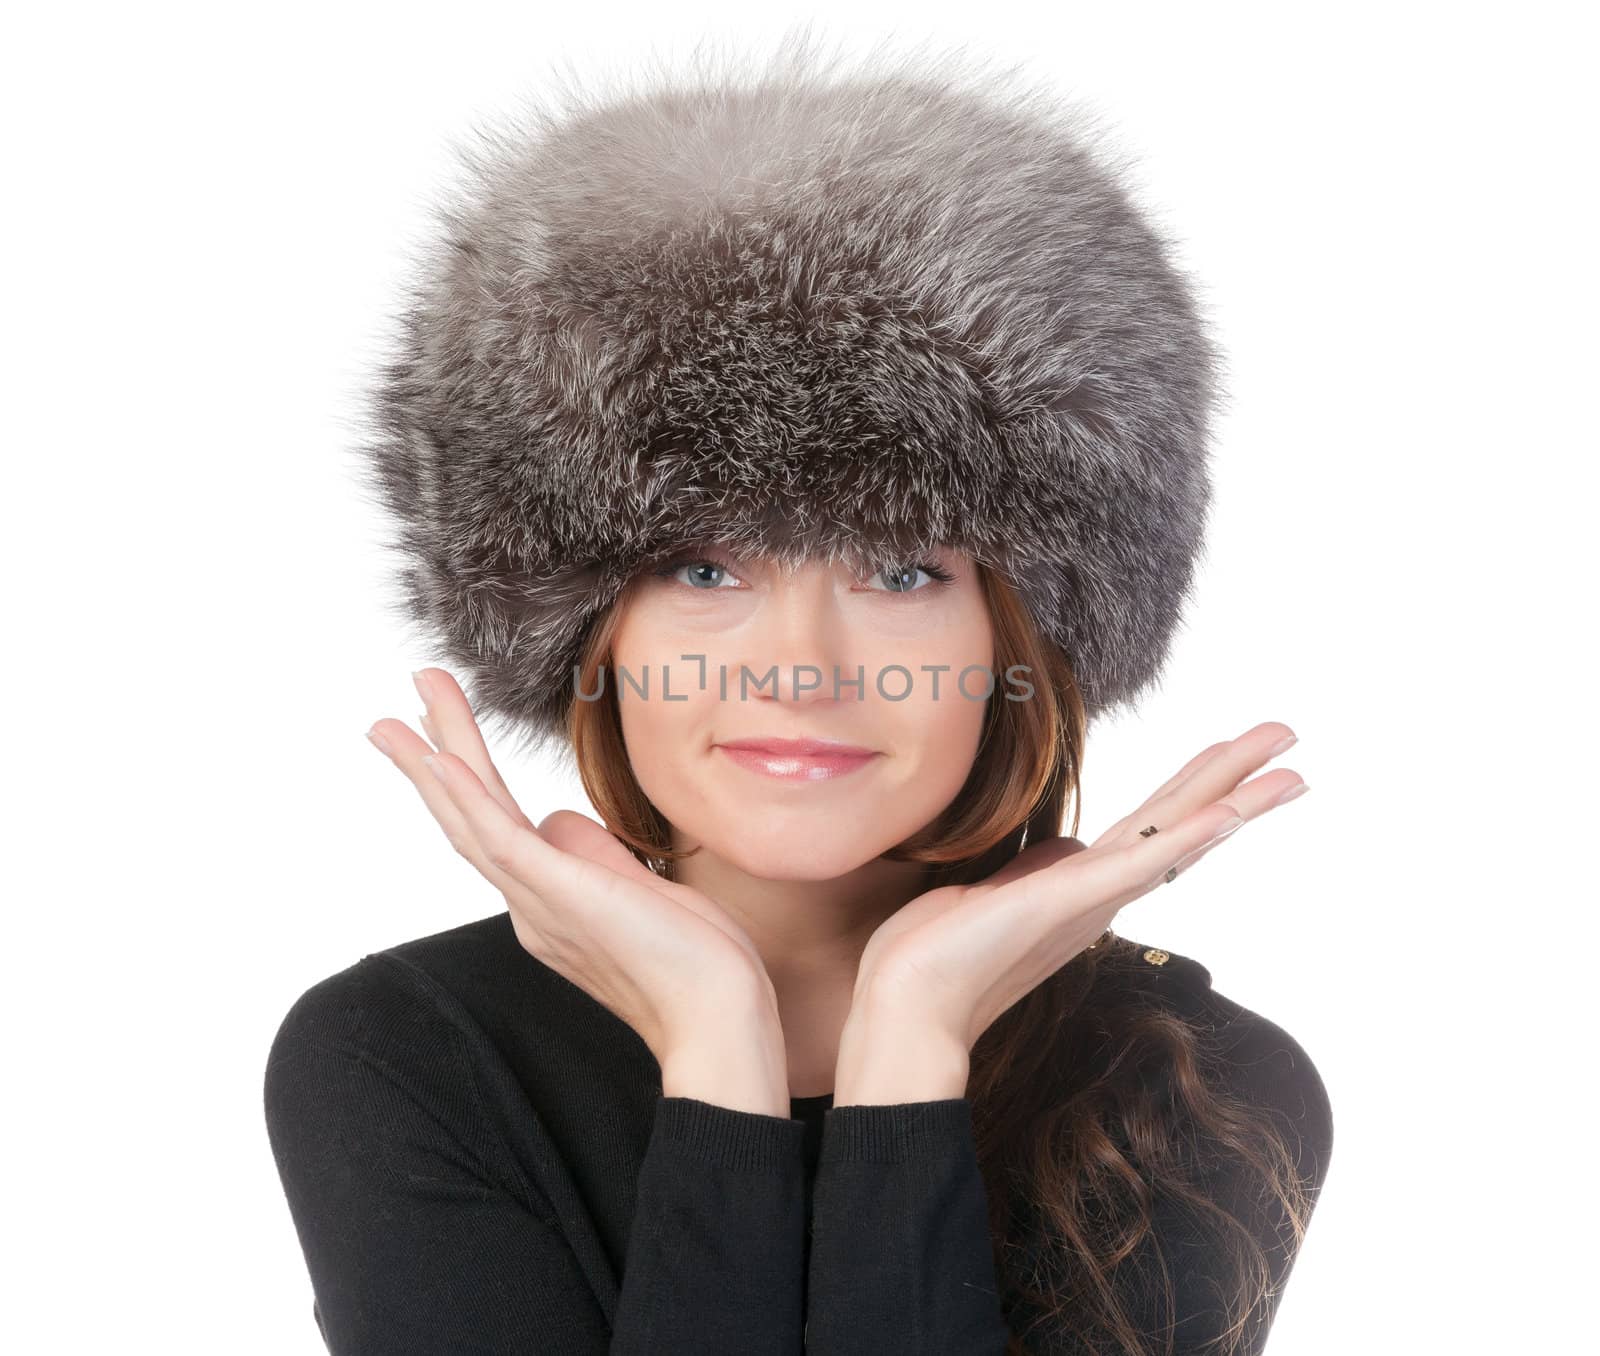 Glamorous woman in winter fashion standing with her hands raised to her fur hat isolated on white